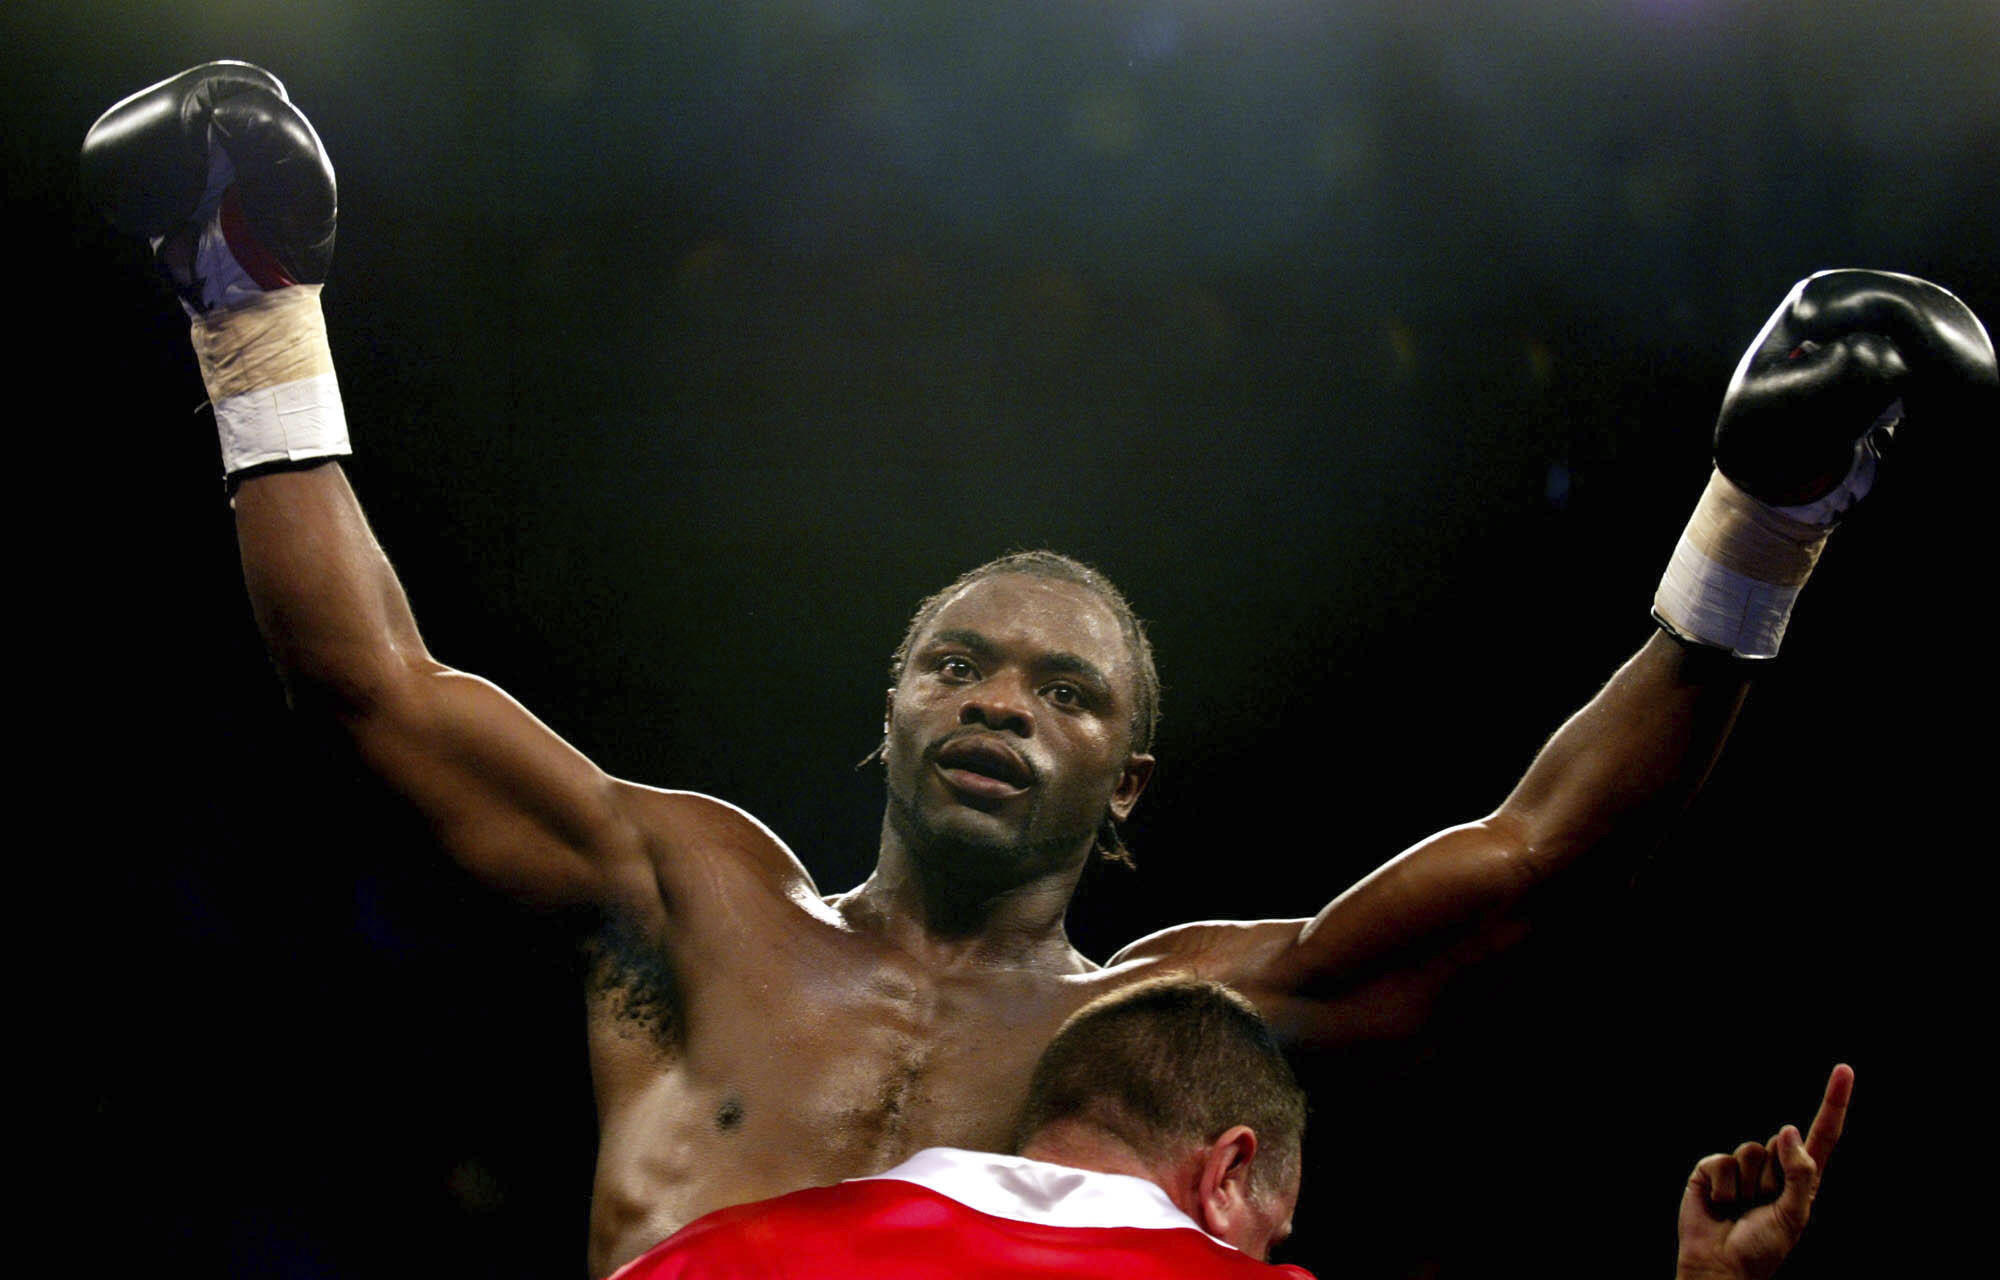 Former boxer Antwun Echols died aged 52 at the beginning of July